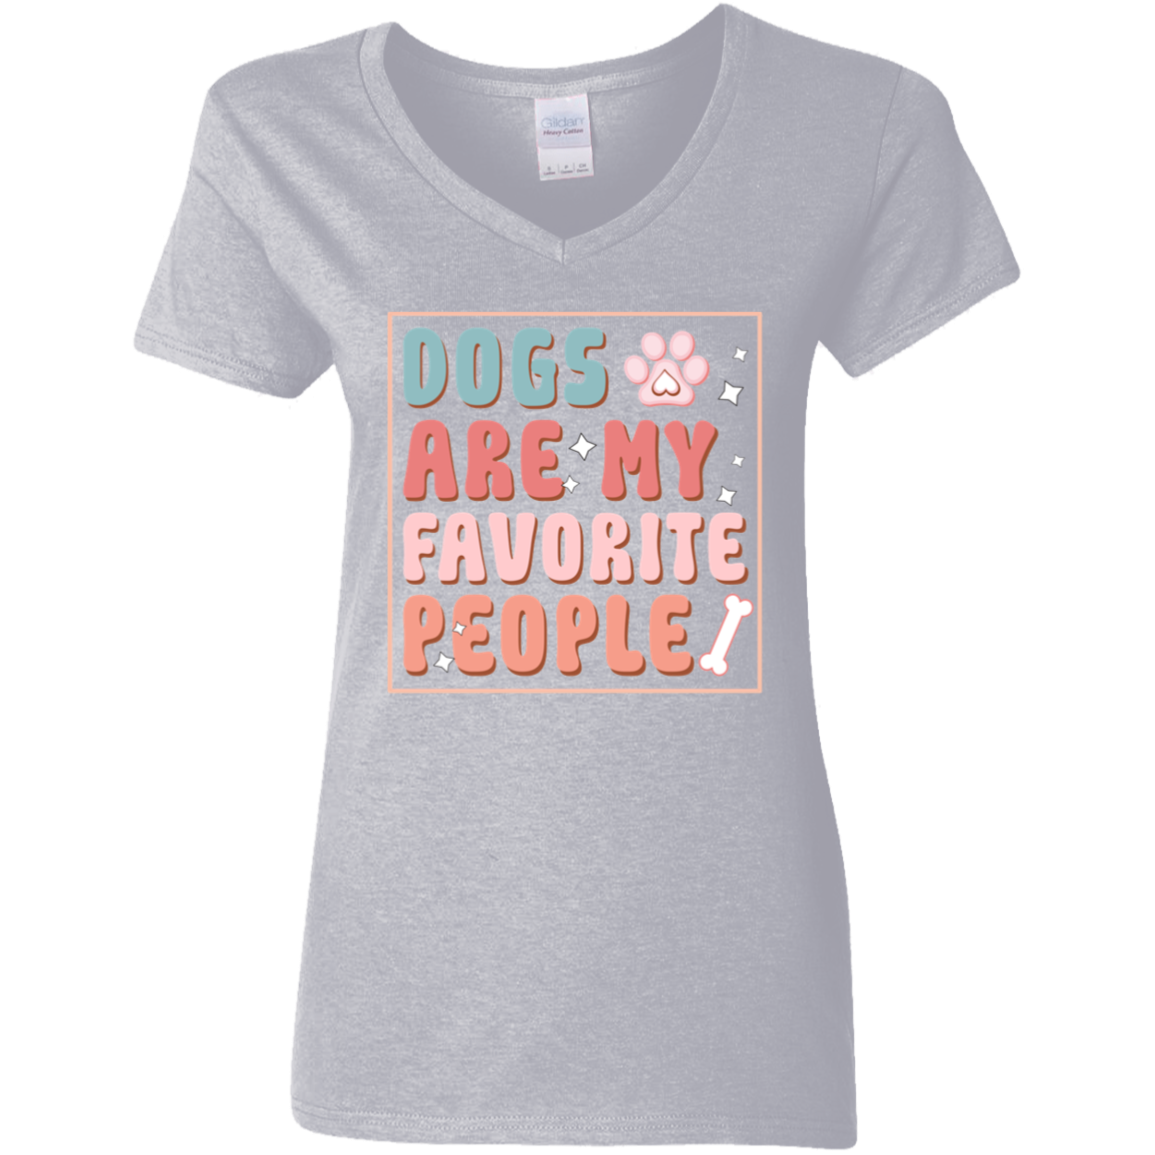 Dogs are My Favorite People Ladies' V-Neck T-Shirt